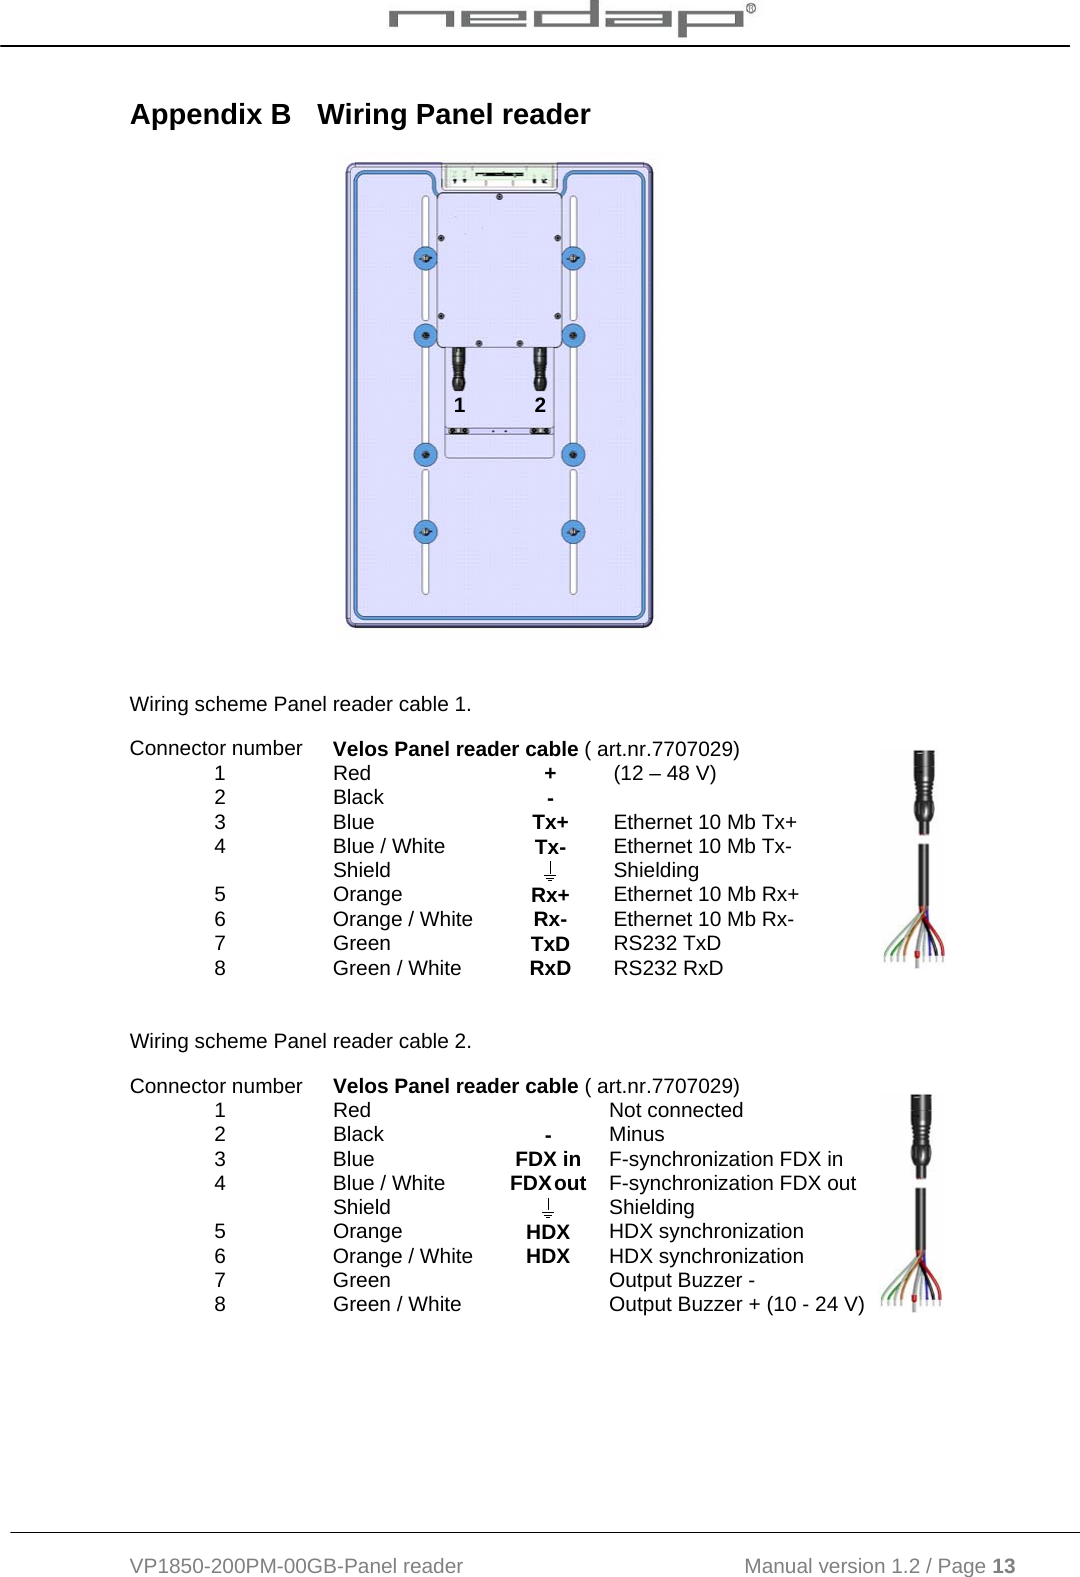  VP1850-200PM-00GB-Panel reader                                           Manual version 1.2 / Page 13  Appendix B  Wiring Panel reader      Wiring scheme Panel reader cable 1. Connector number  Velos Panel reader cable ( art.nr.7707029) 1 Red  + (12 – 48 V) 2 Black  -  3 Blue  Tx+ Ethernet 10 Mb Tx+ 4  Blue / White  Tx- Ethernet 10 Mb Tx-  Shield   Shielding 5 Orange  Rx+ Ethernet 10 Mb Rx+ 6  Orange / White  Rx- Ethernet 10 Mb Rx- 7 Green  TxD RS232 TxD 8  Green / White  RxD RS232 RxD  Wiring scheme Panel reader cable 2. Connector number  Velos Panel reader cable ( art.nr.7707029) 1 Red   Not connected 2 Black  - Minus 3 Blue  FDX in F-synchronization FDX in 4  Blue / White  FDX  out F-synchronization FDX out  Shield   Shielding 5 Orange  HDX HDX synchronization 6  Orange / White  HDX HDX synchronization 7  Green    Output Buzzer - 8  Green / White    Output Buzzer + (10 - 24 V)  1            2 